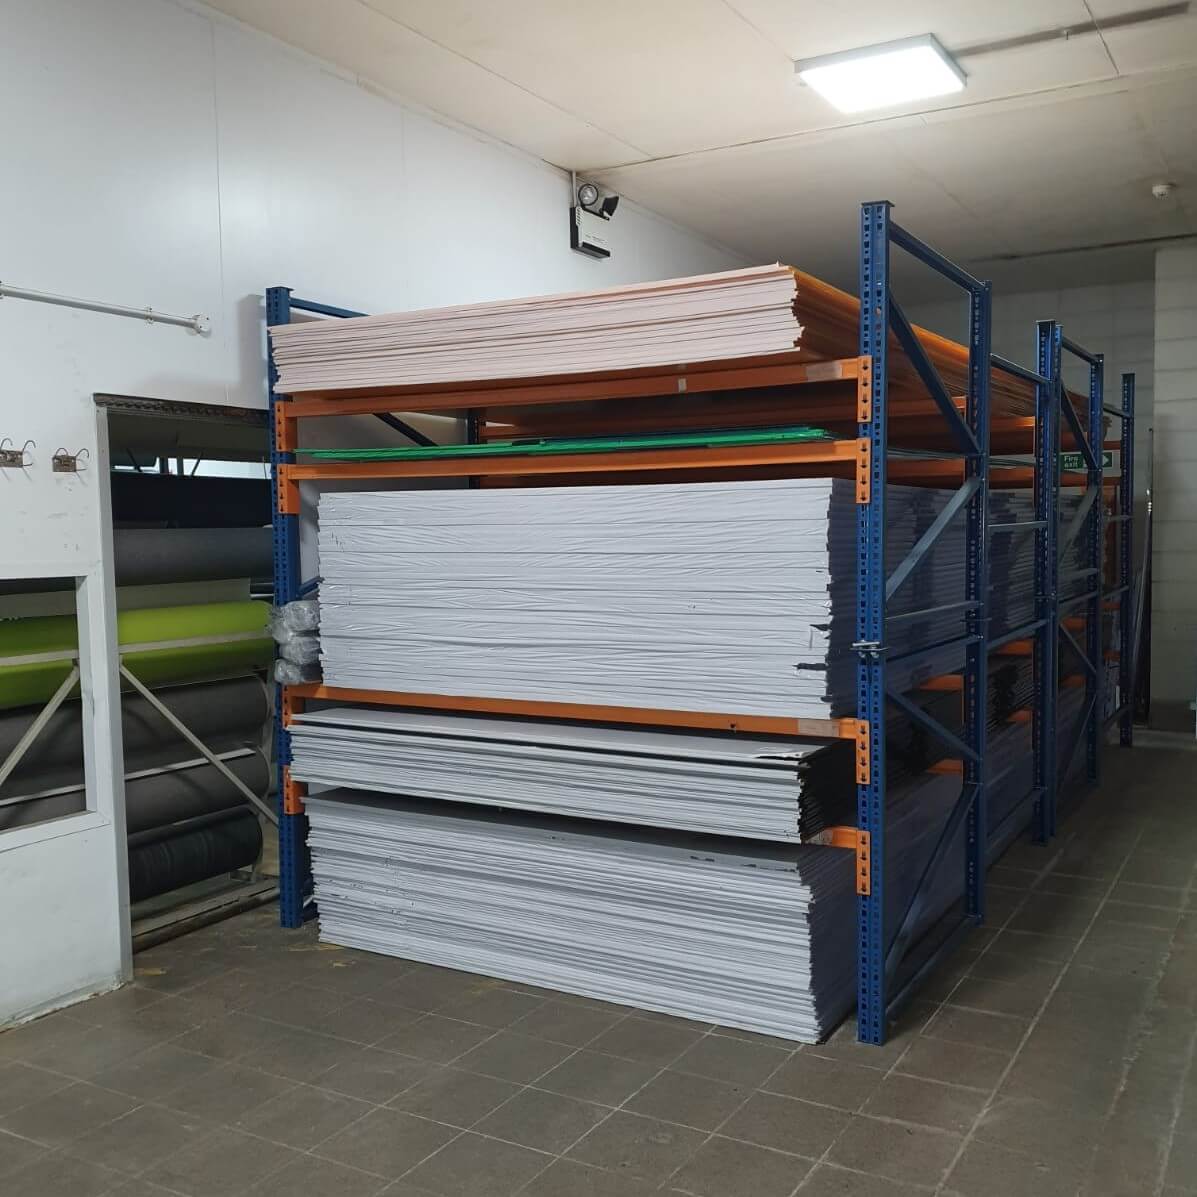 8mm Orange  Polycarbonate Roofing Sheet  (4m+ Length - Collection)